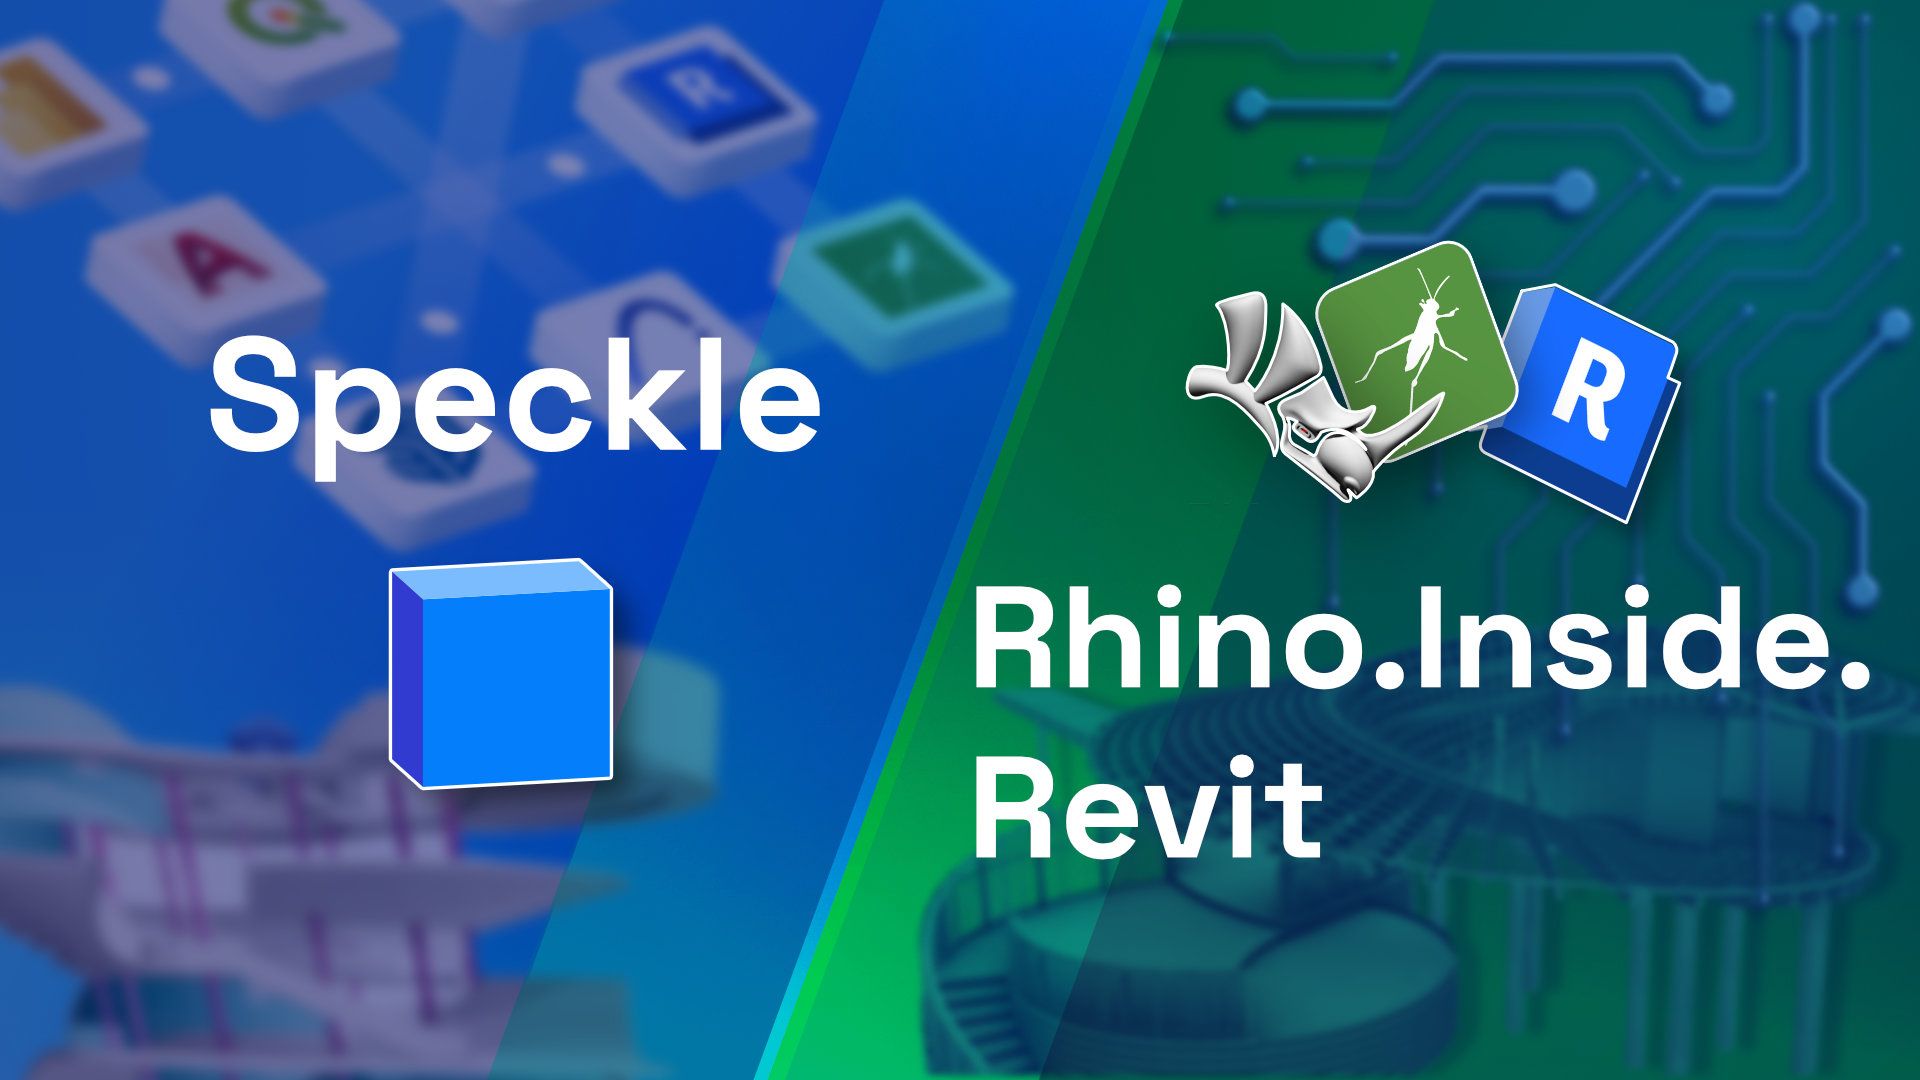 Speckle vs Rhino.Inside.Revit: Which Tool is Better for Your AEC Project?